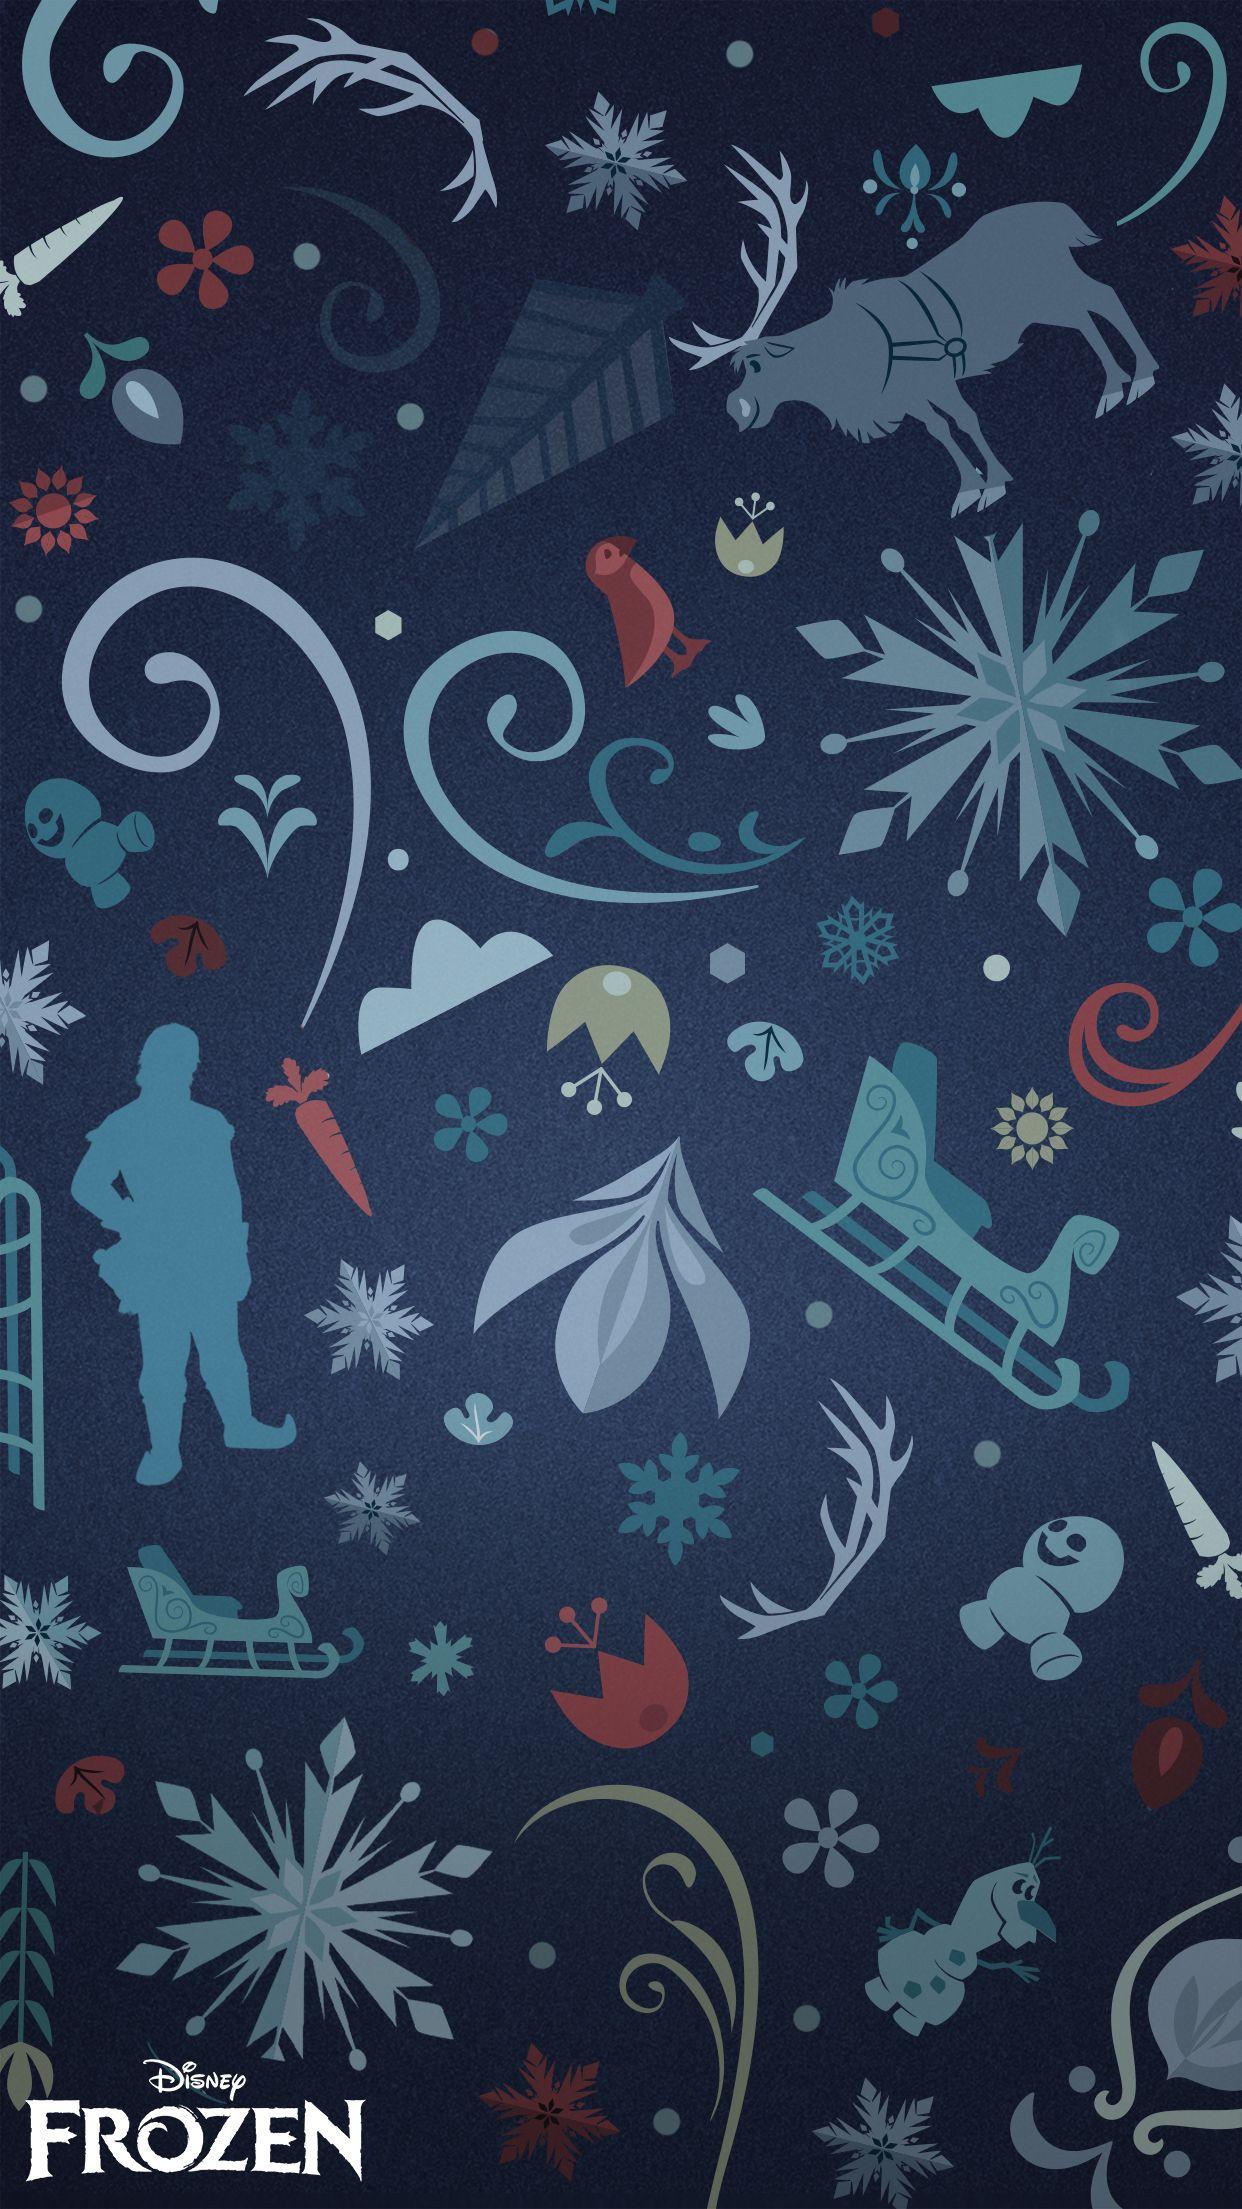 These Frozen Wallpaper Will Definitely Make Your Phone